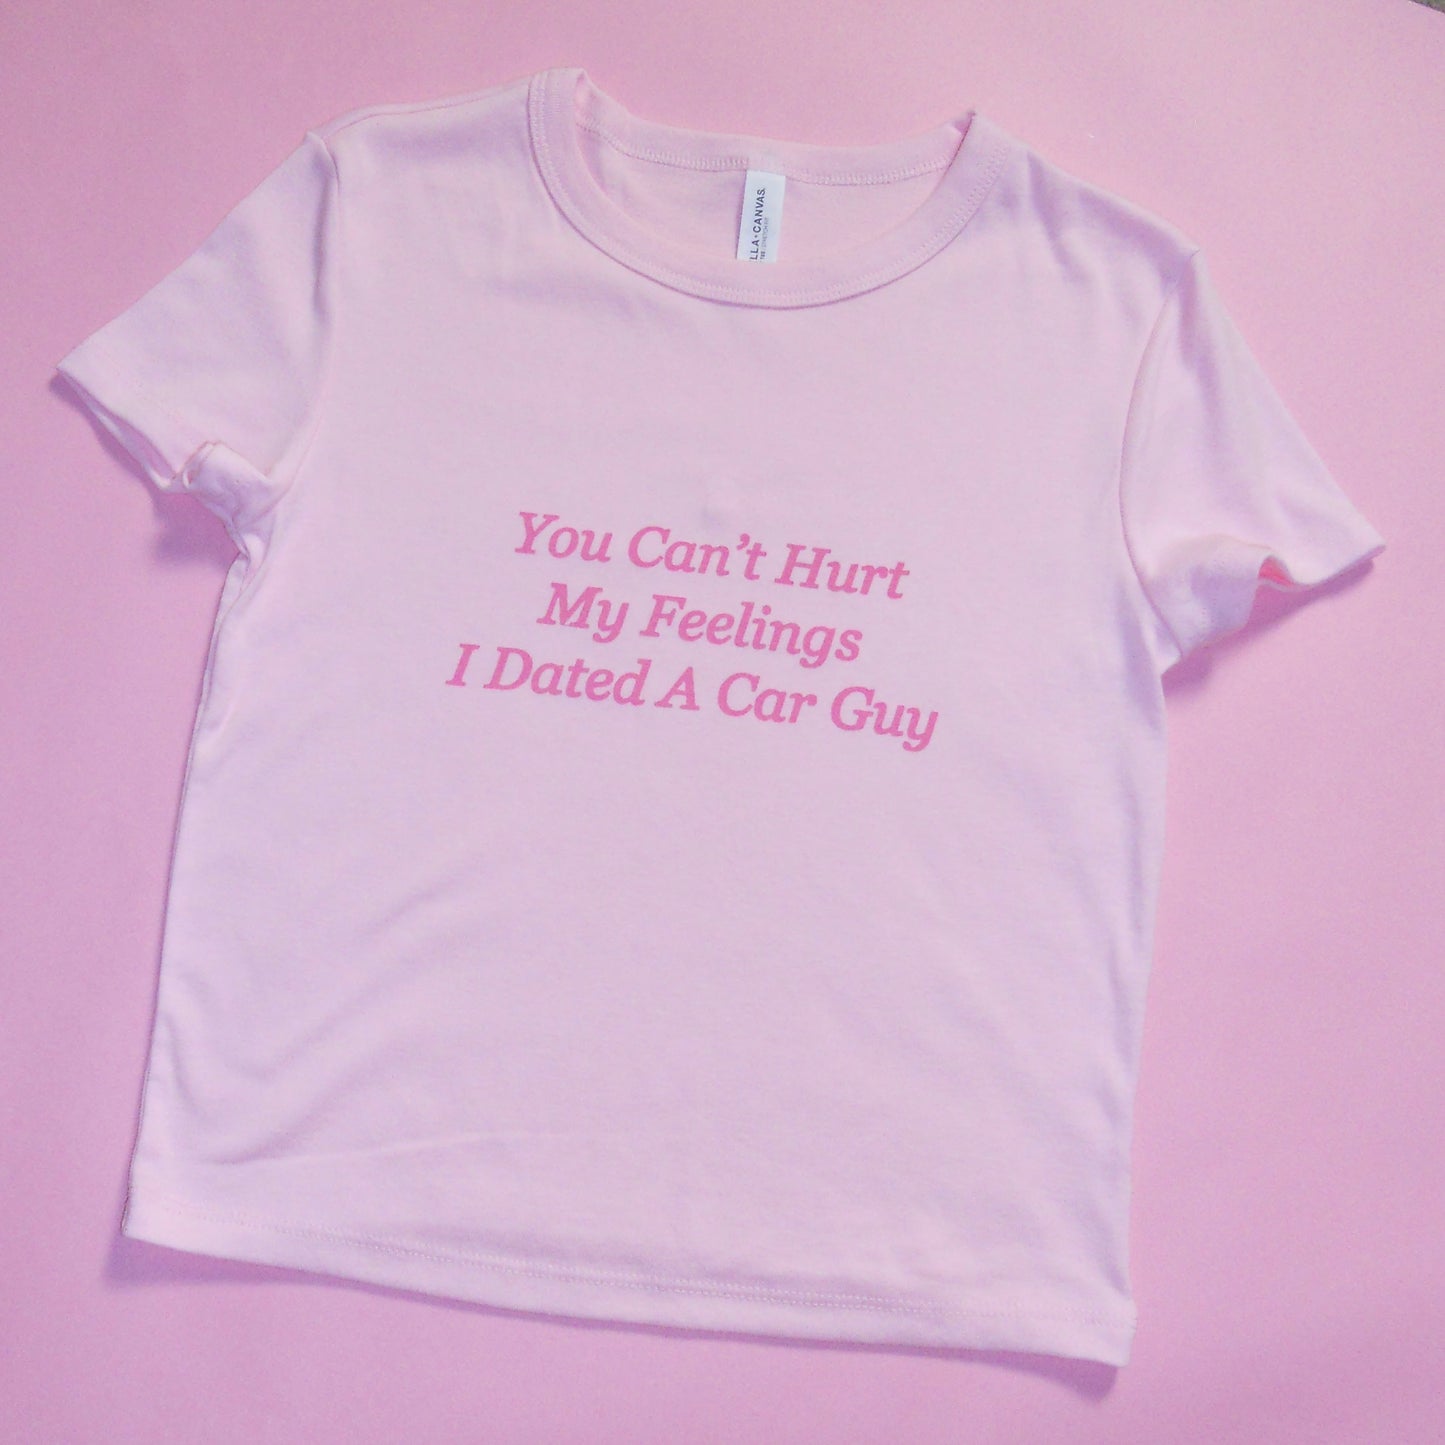 I DATED A CAR GUY baby tee